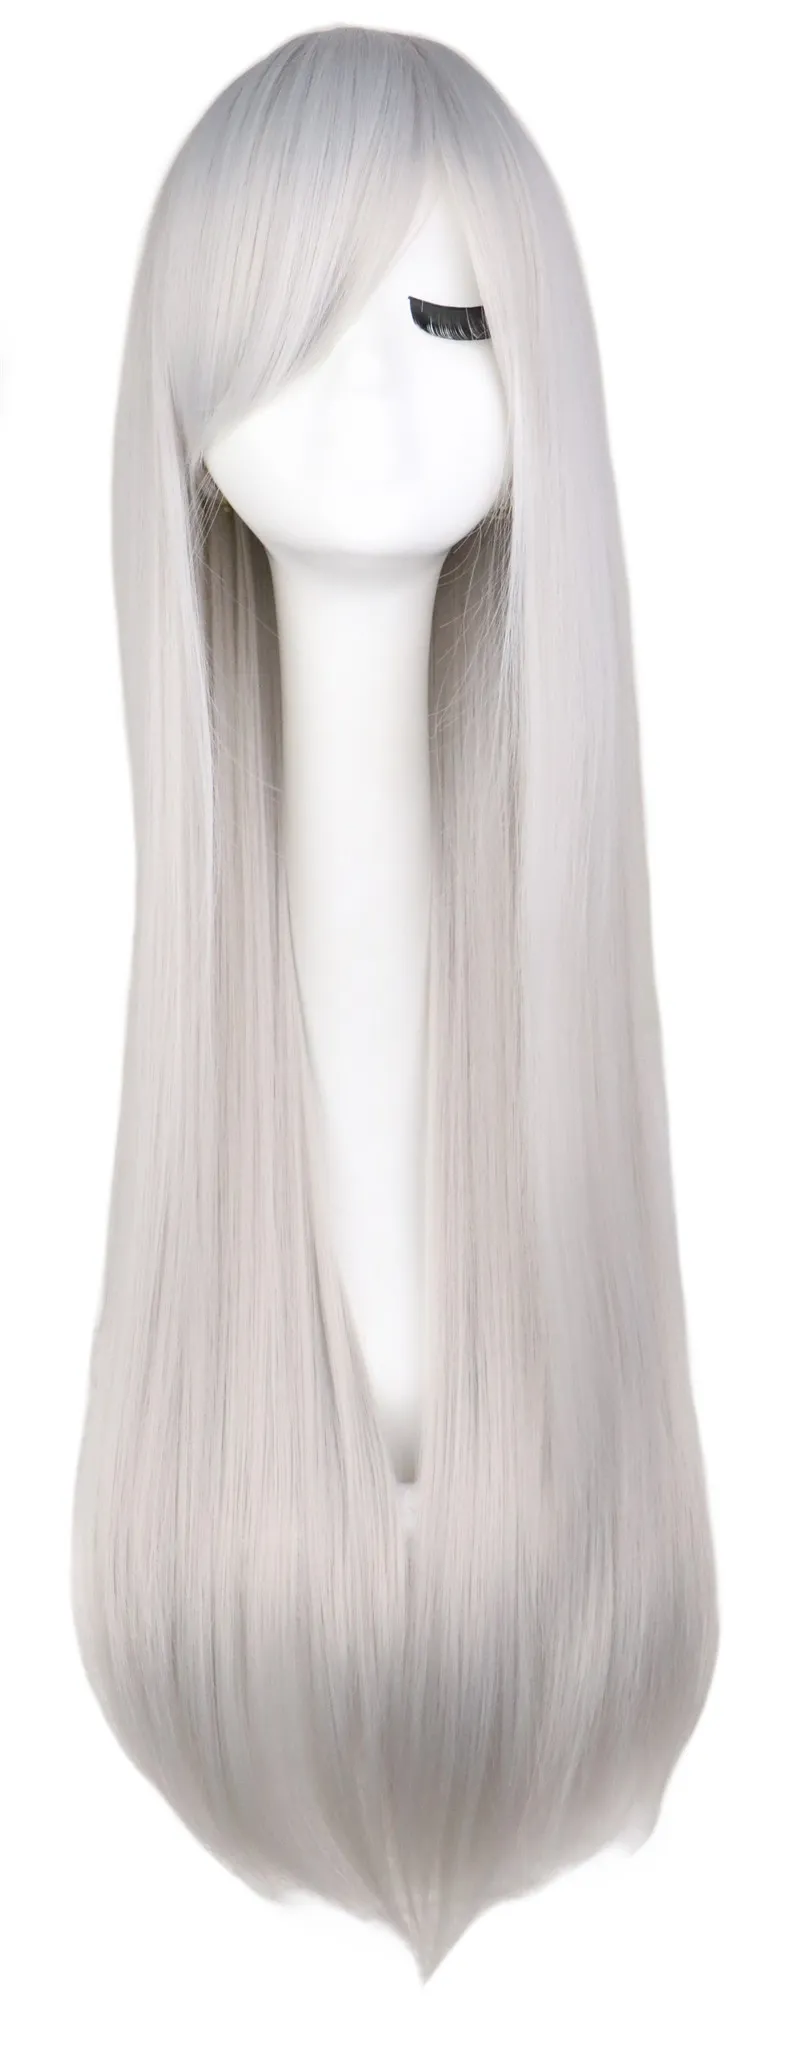 Women Men Long Straight Cosutme Party Sliver Gray Wig Cosplay 80 Cm High Qulaity Synthetic Hair Wigs